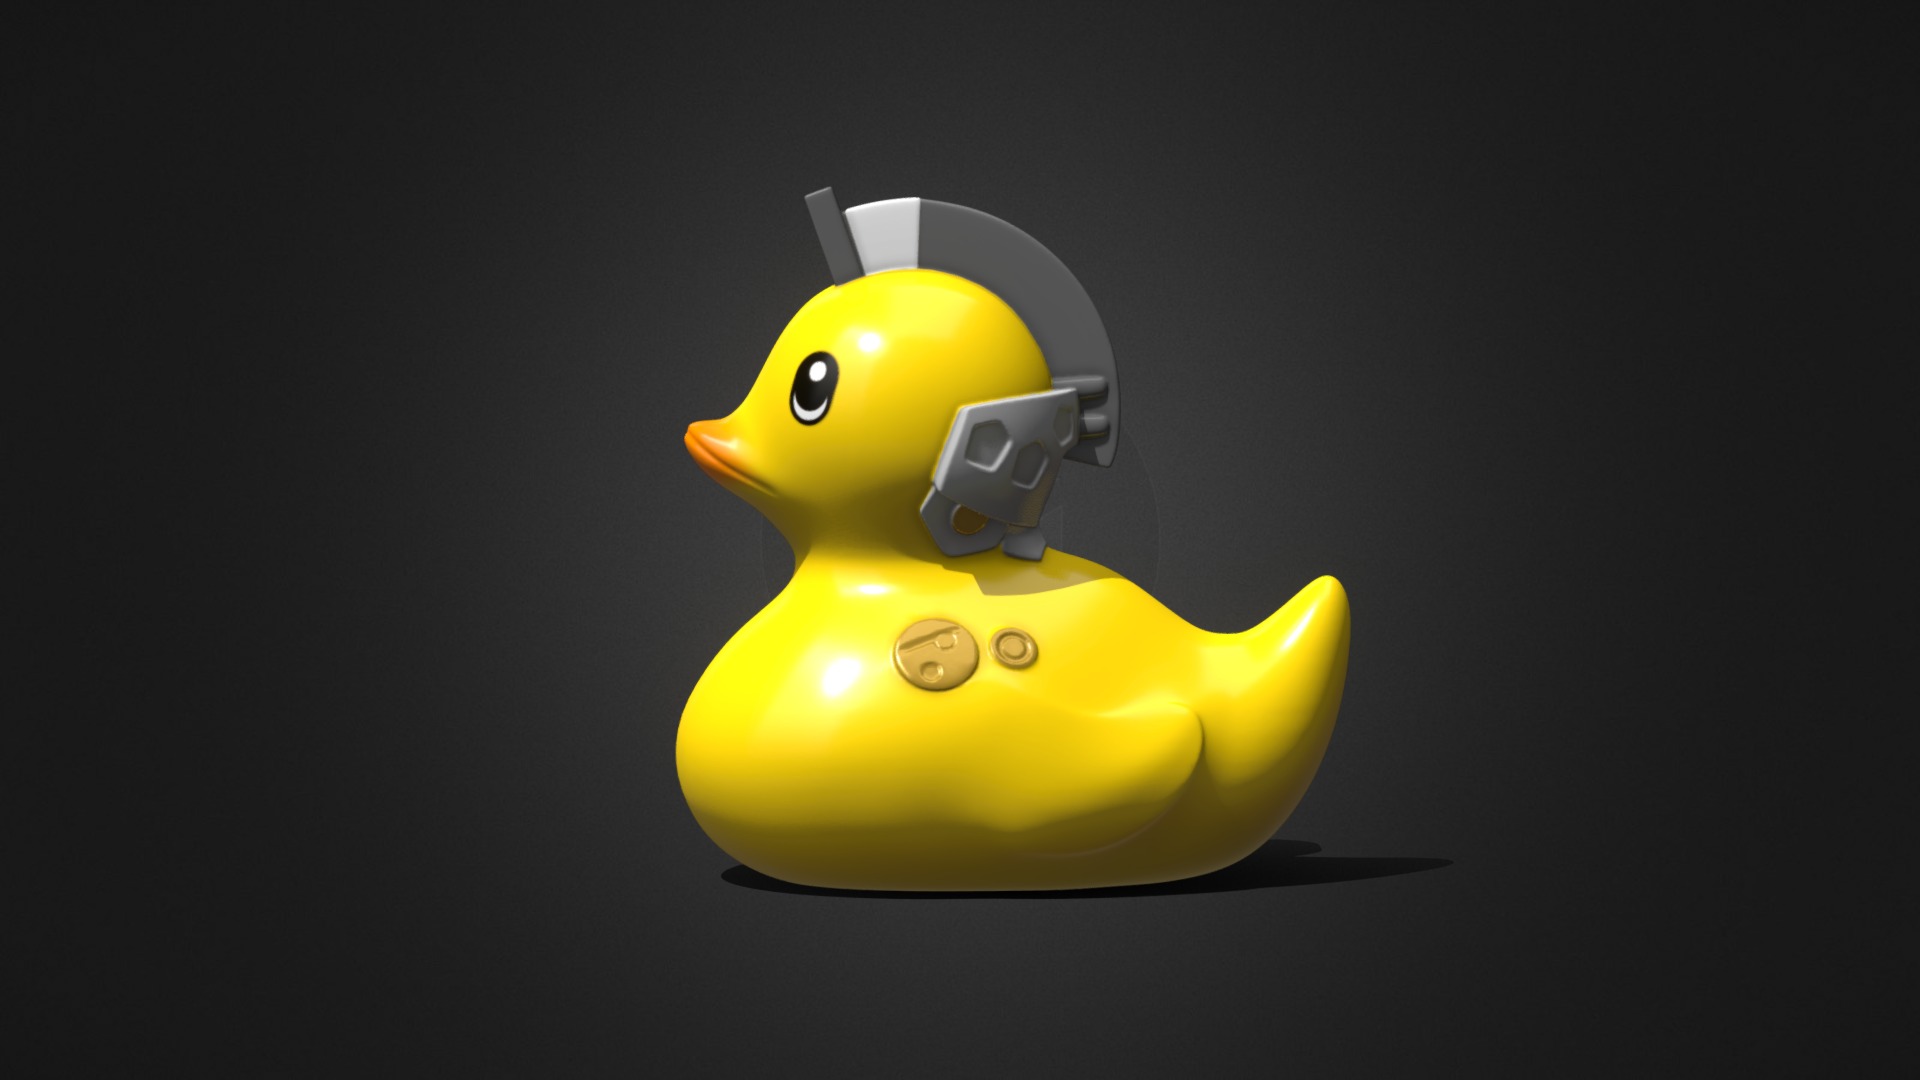 3D model Duck Ludens 001 - This is a 3D model of the Duck Ludens 001. The 3D model is about a yellow rubber duck.